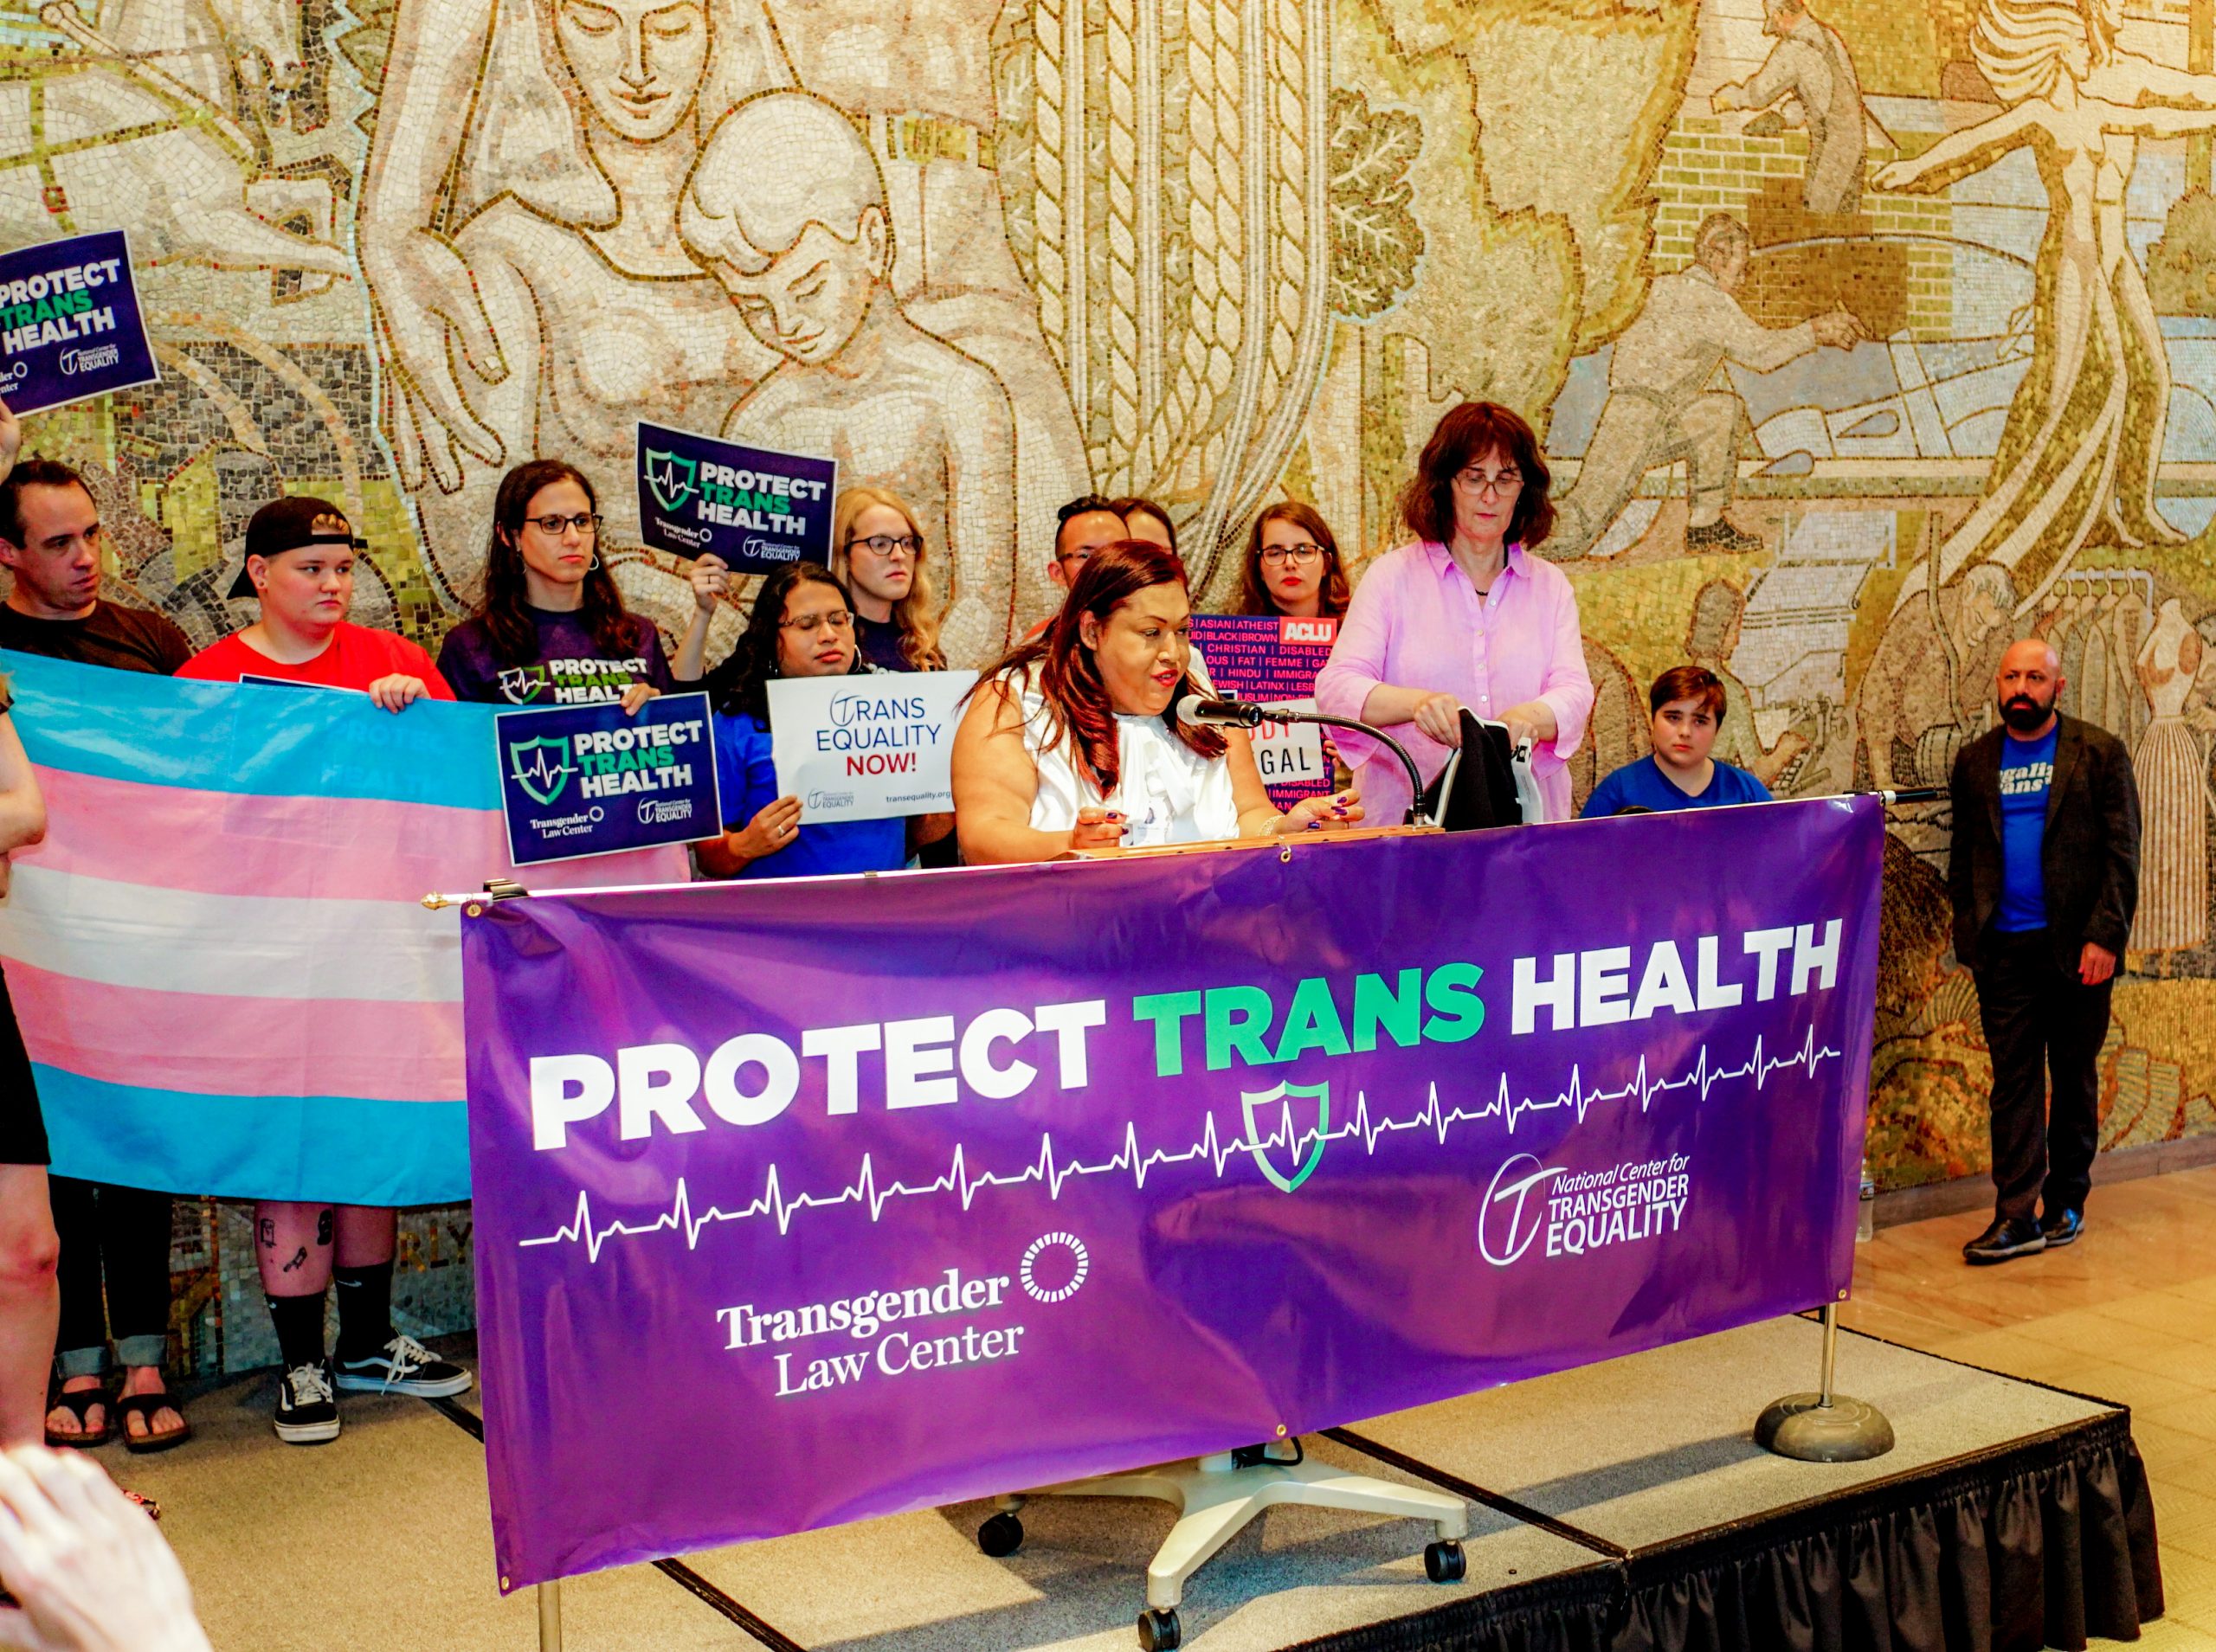 A woman speaks in front of a sign that says "PROTECT TRANS HEALTH."